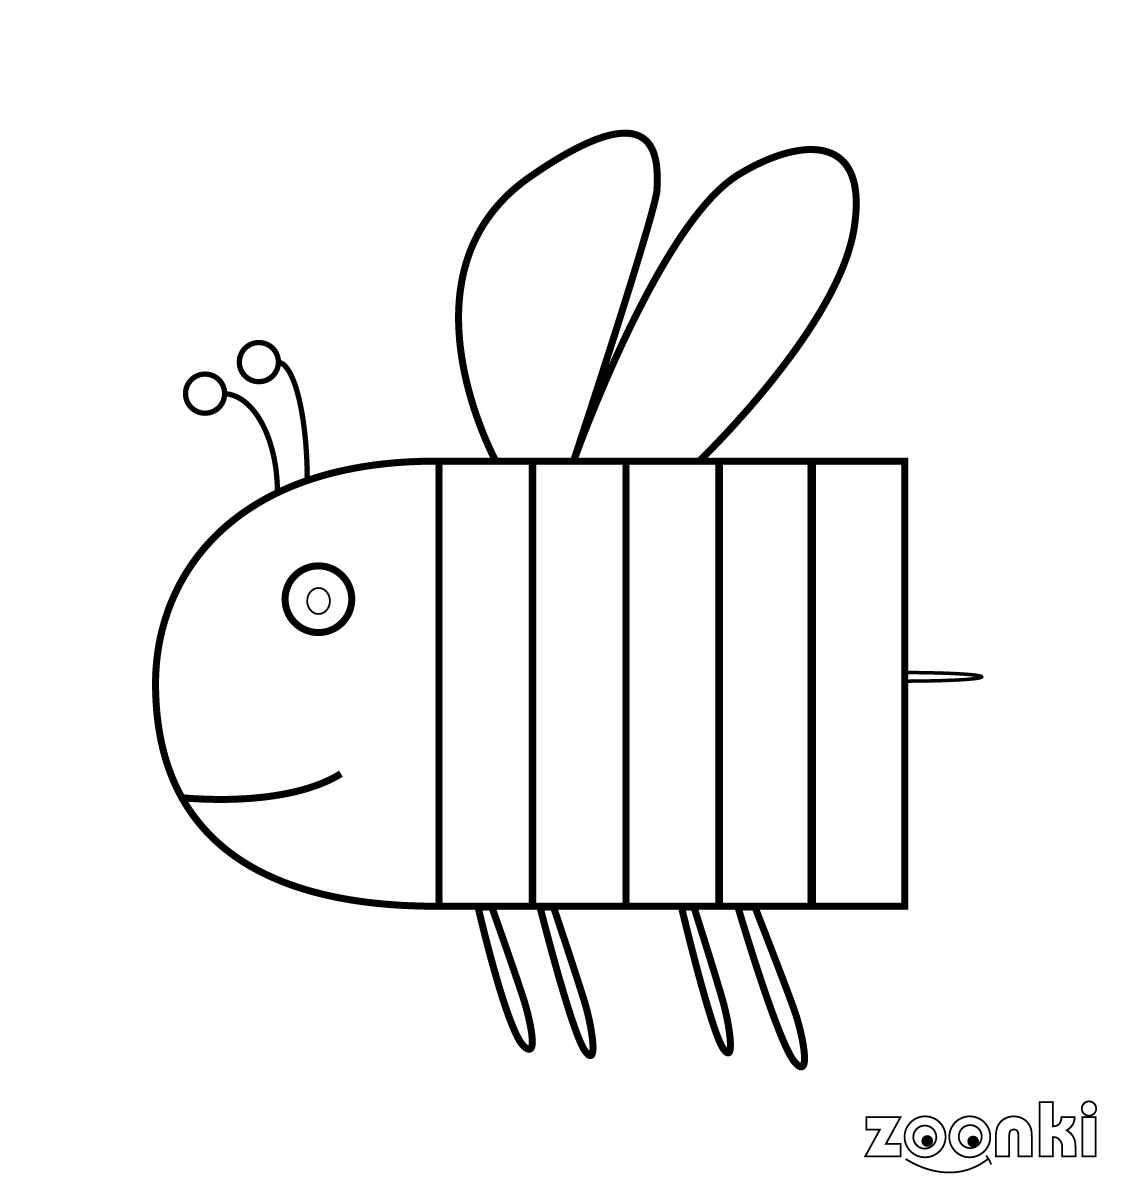 zoonki bee 001 coloring pages